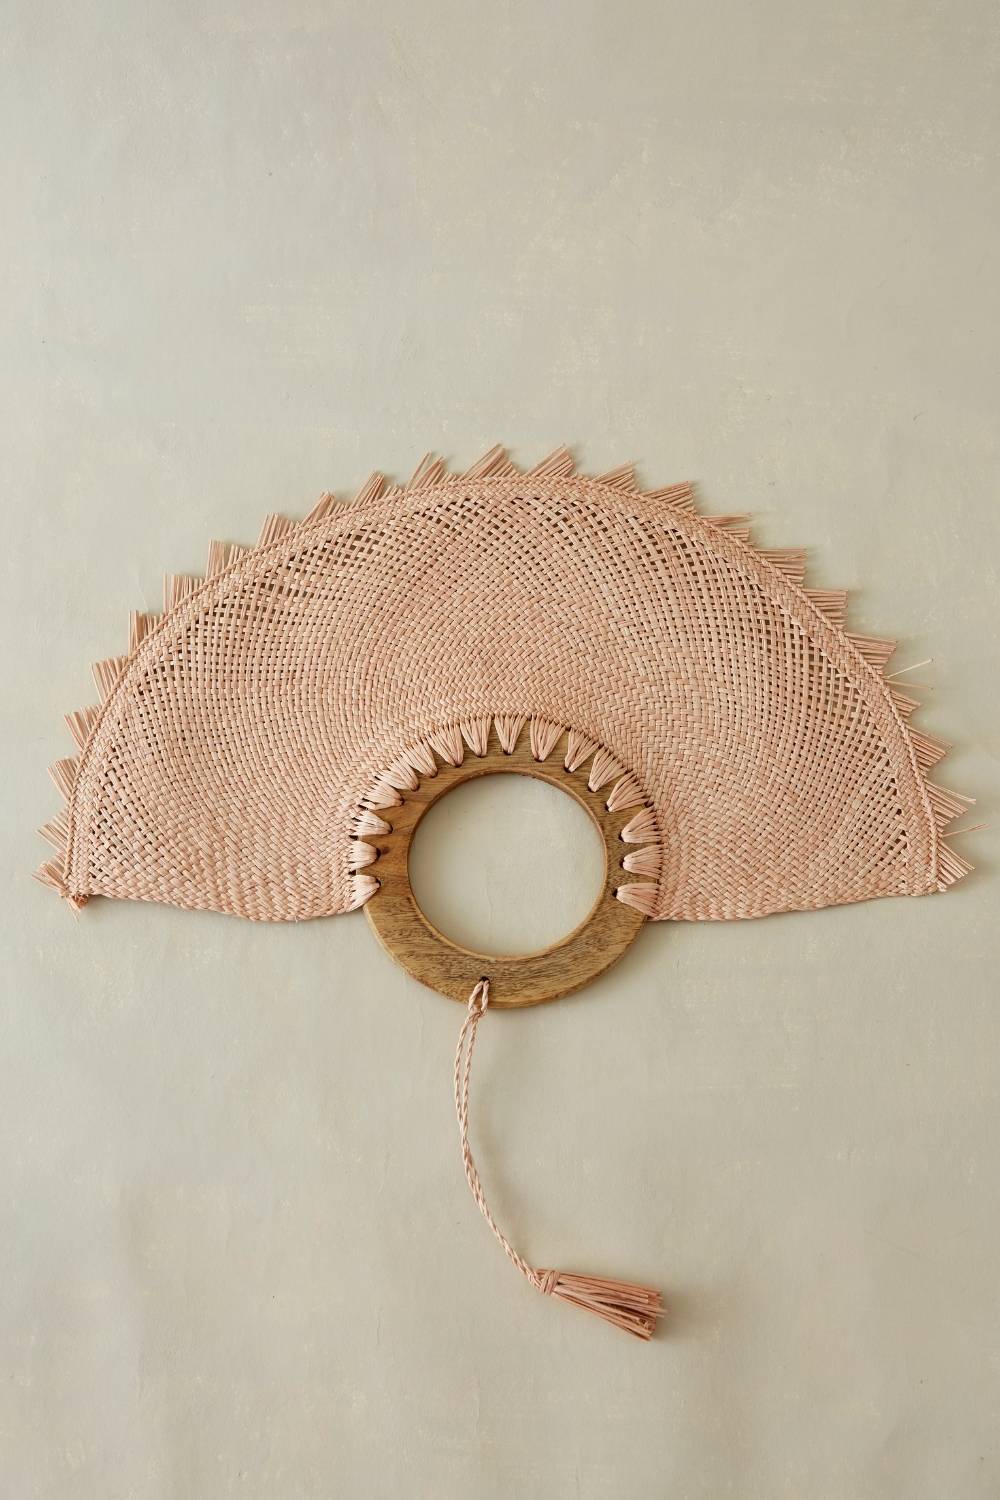 Artisan & Fox - Homewares - JIPIJAPA Handwoven Wall Decor in Pastel Pink - Handcrafted in Mexico